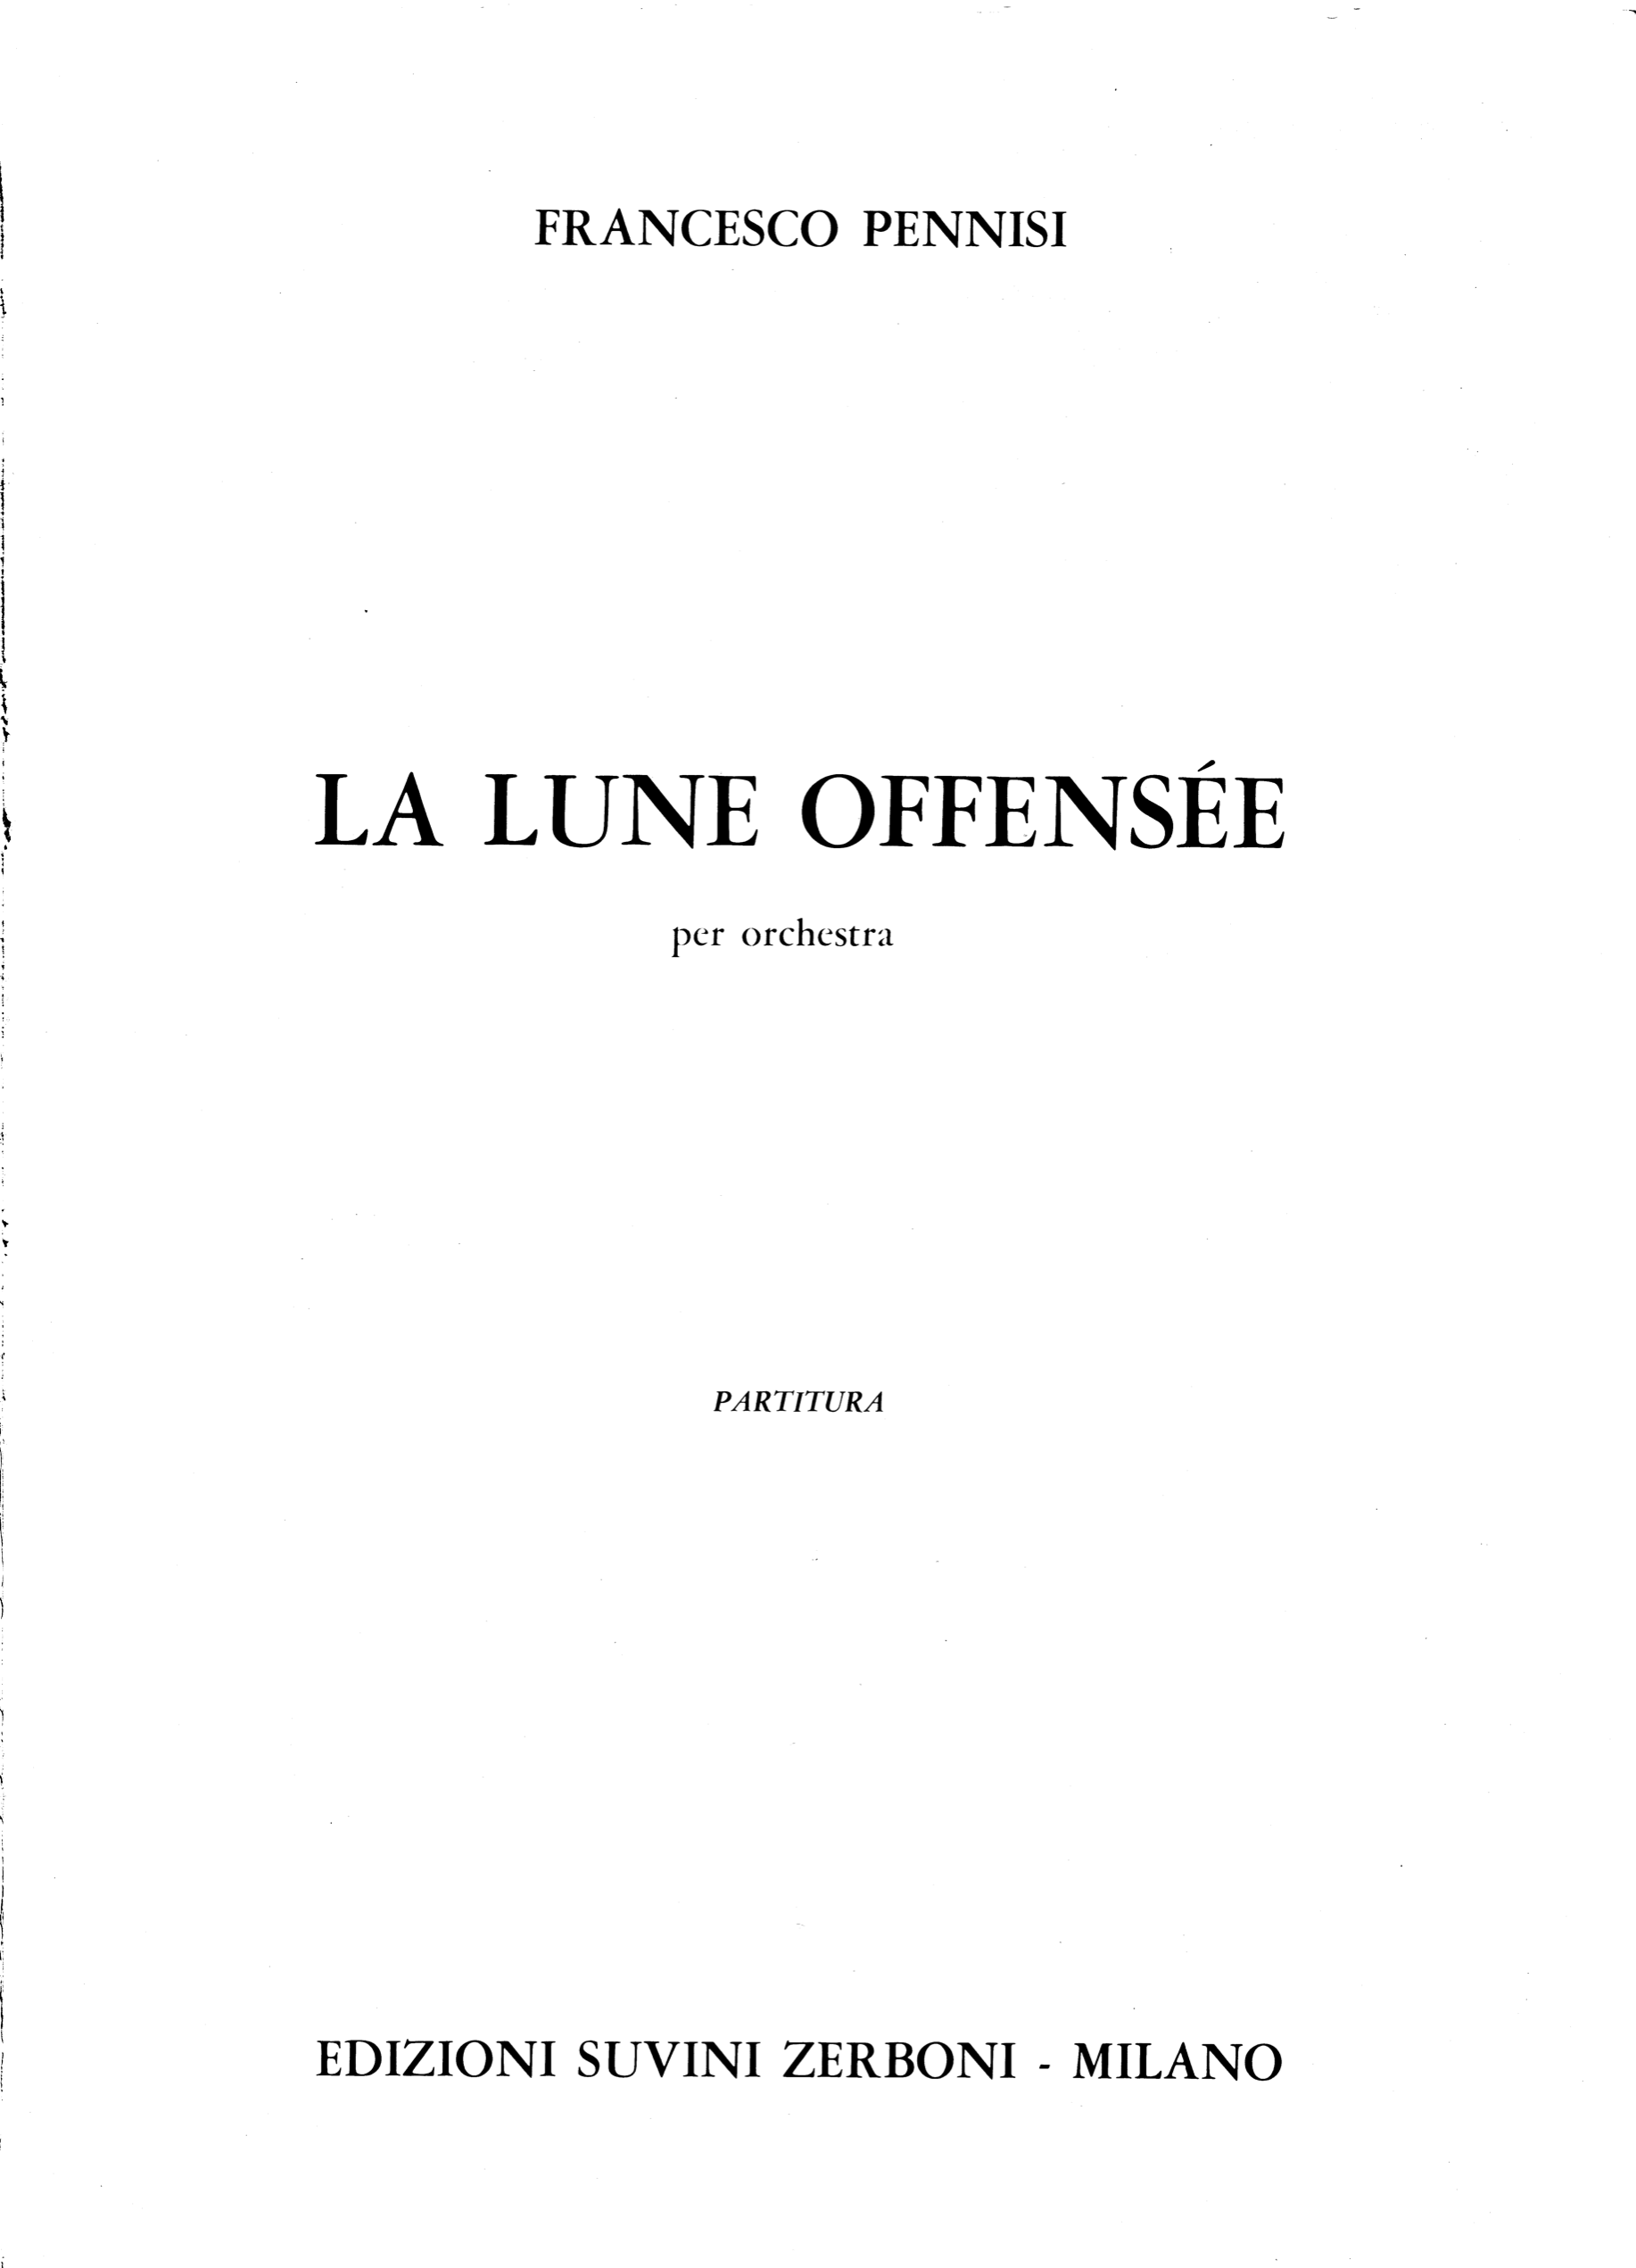 La lune offensee_Pennisi 1